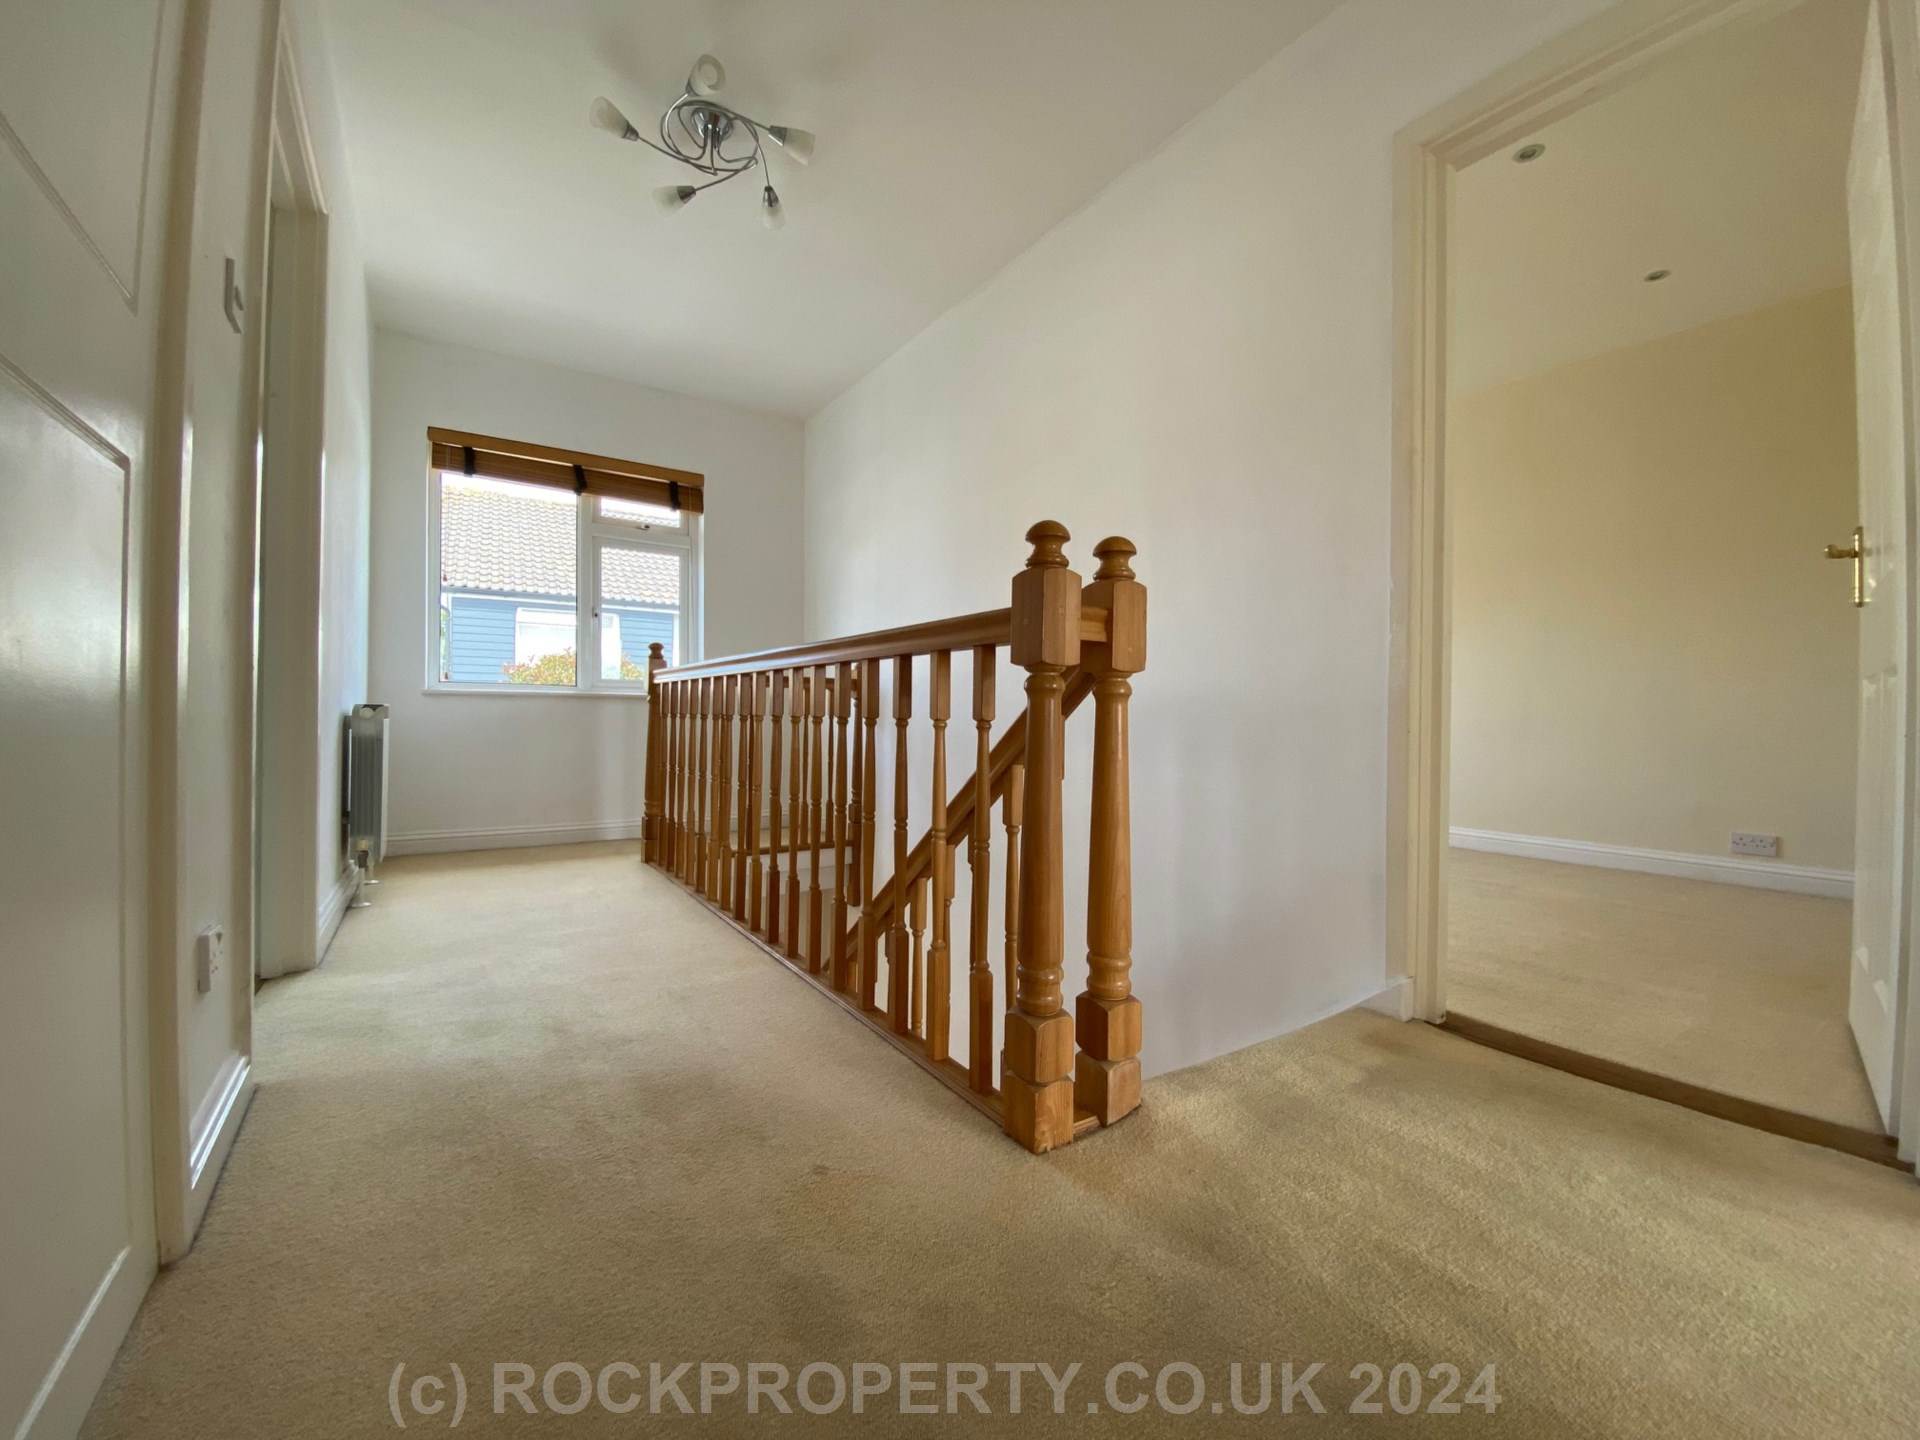 SUBSTANTIAL 3/4 BED FAMILY HOUSE, Outskirts of St Helier, Image 11